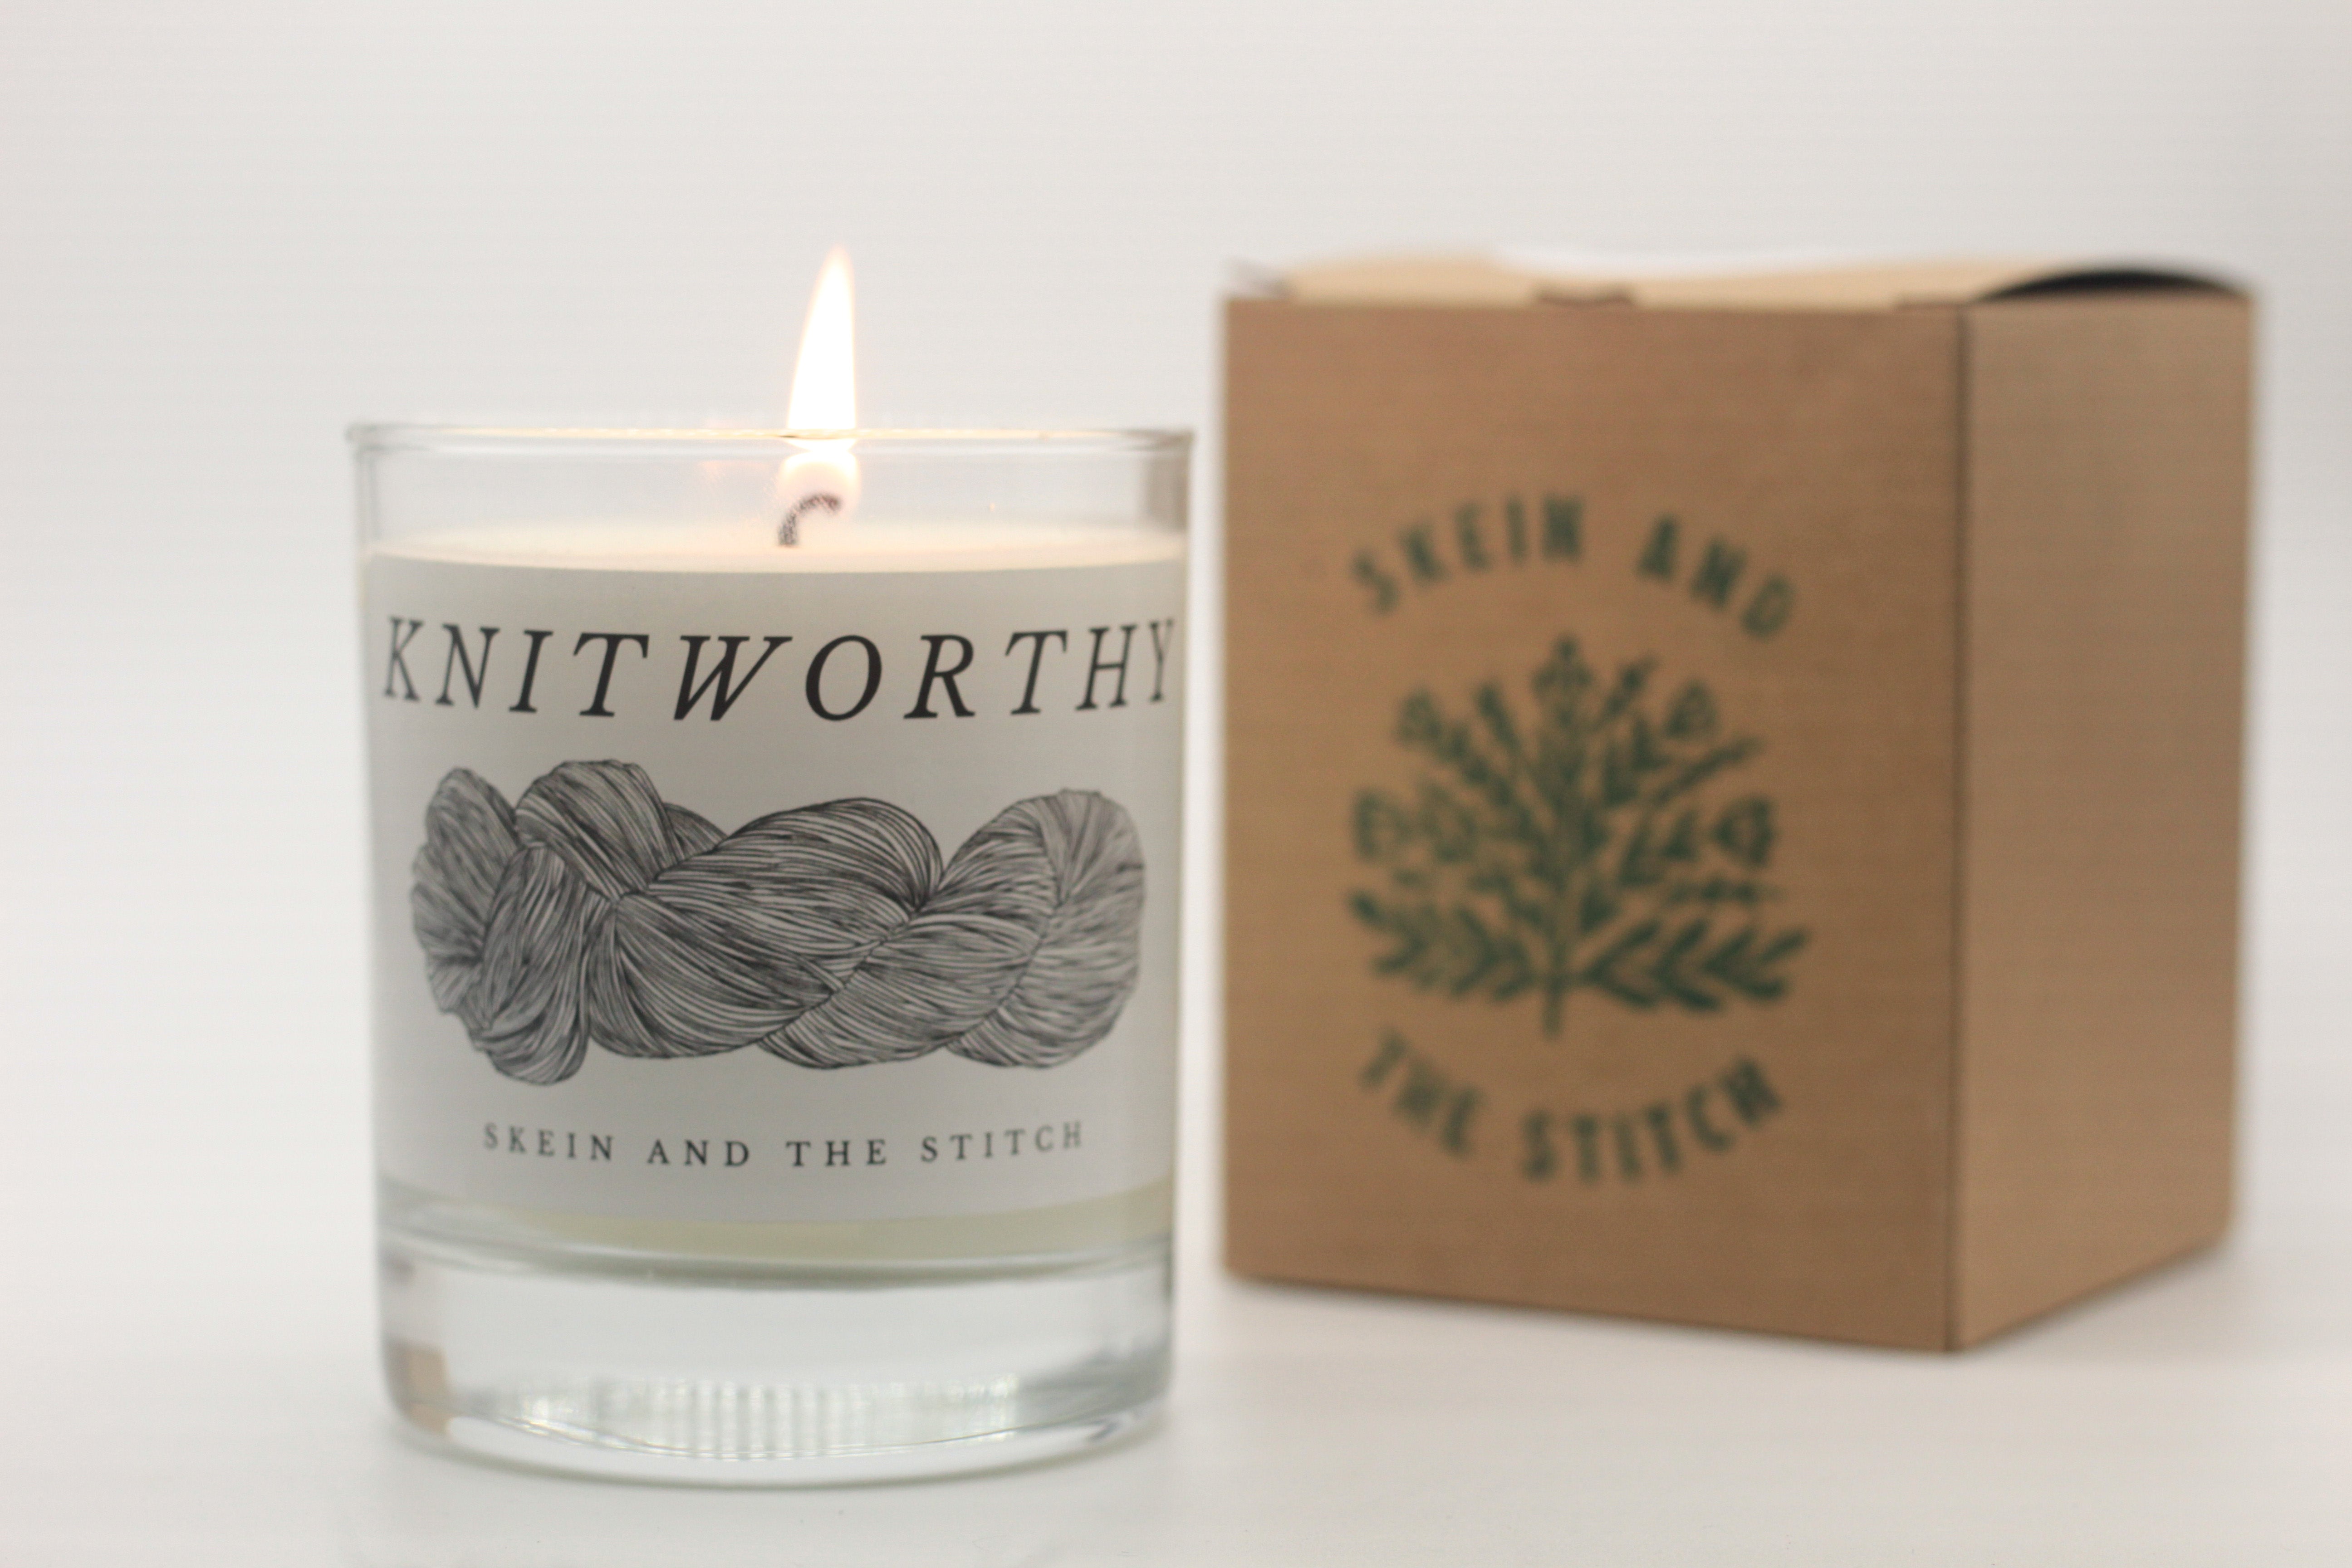 Knitworthy - Hand Poured Soy Wax Candle